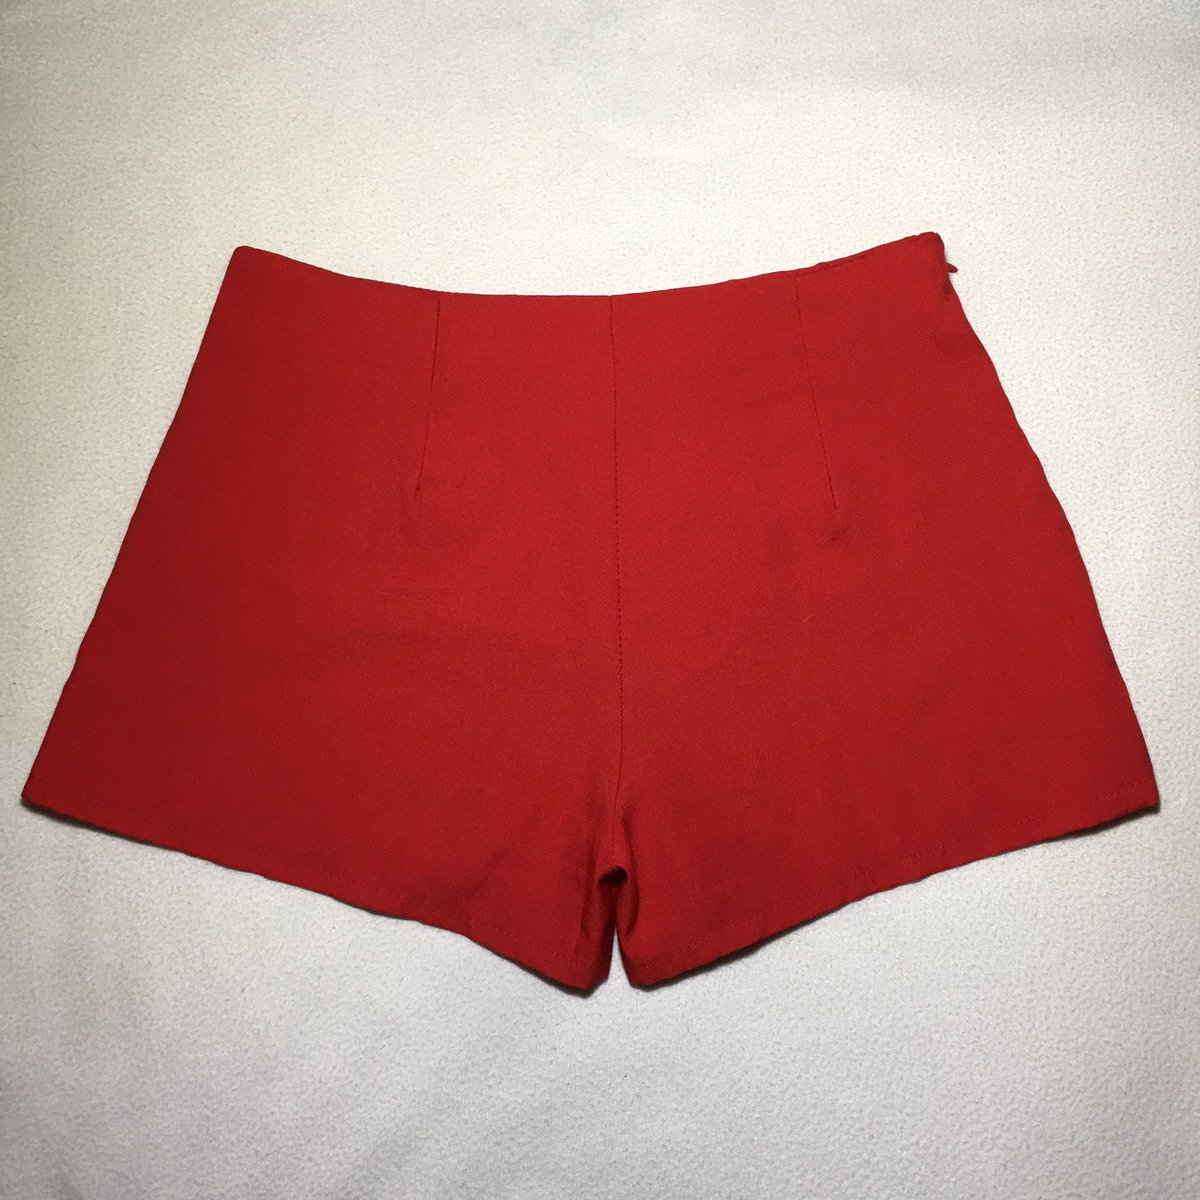 Red Short 

Waist: 29inches 
Length: 10.5inches

💰30php MINE
💰40php GRAB

• First to comment 'MINE' basis 'GRAB' comments are priority‼️
• Send a screenshot of chosen item with your order form.

#prelovedbyrox 
#preloveditems
#prelovedph 
#short